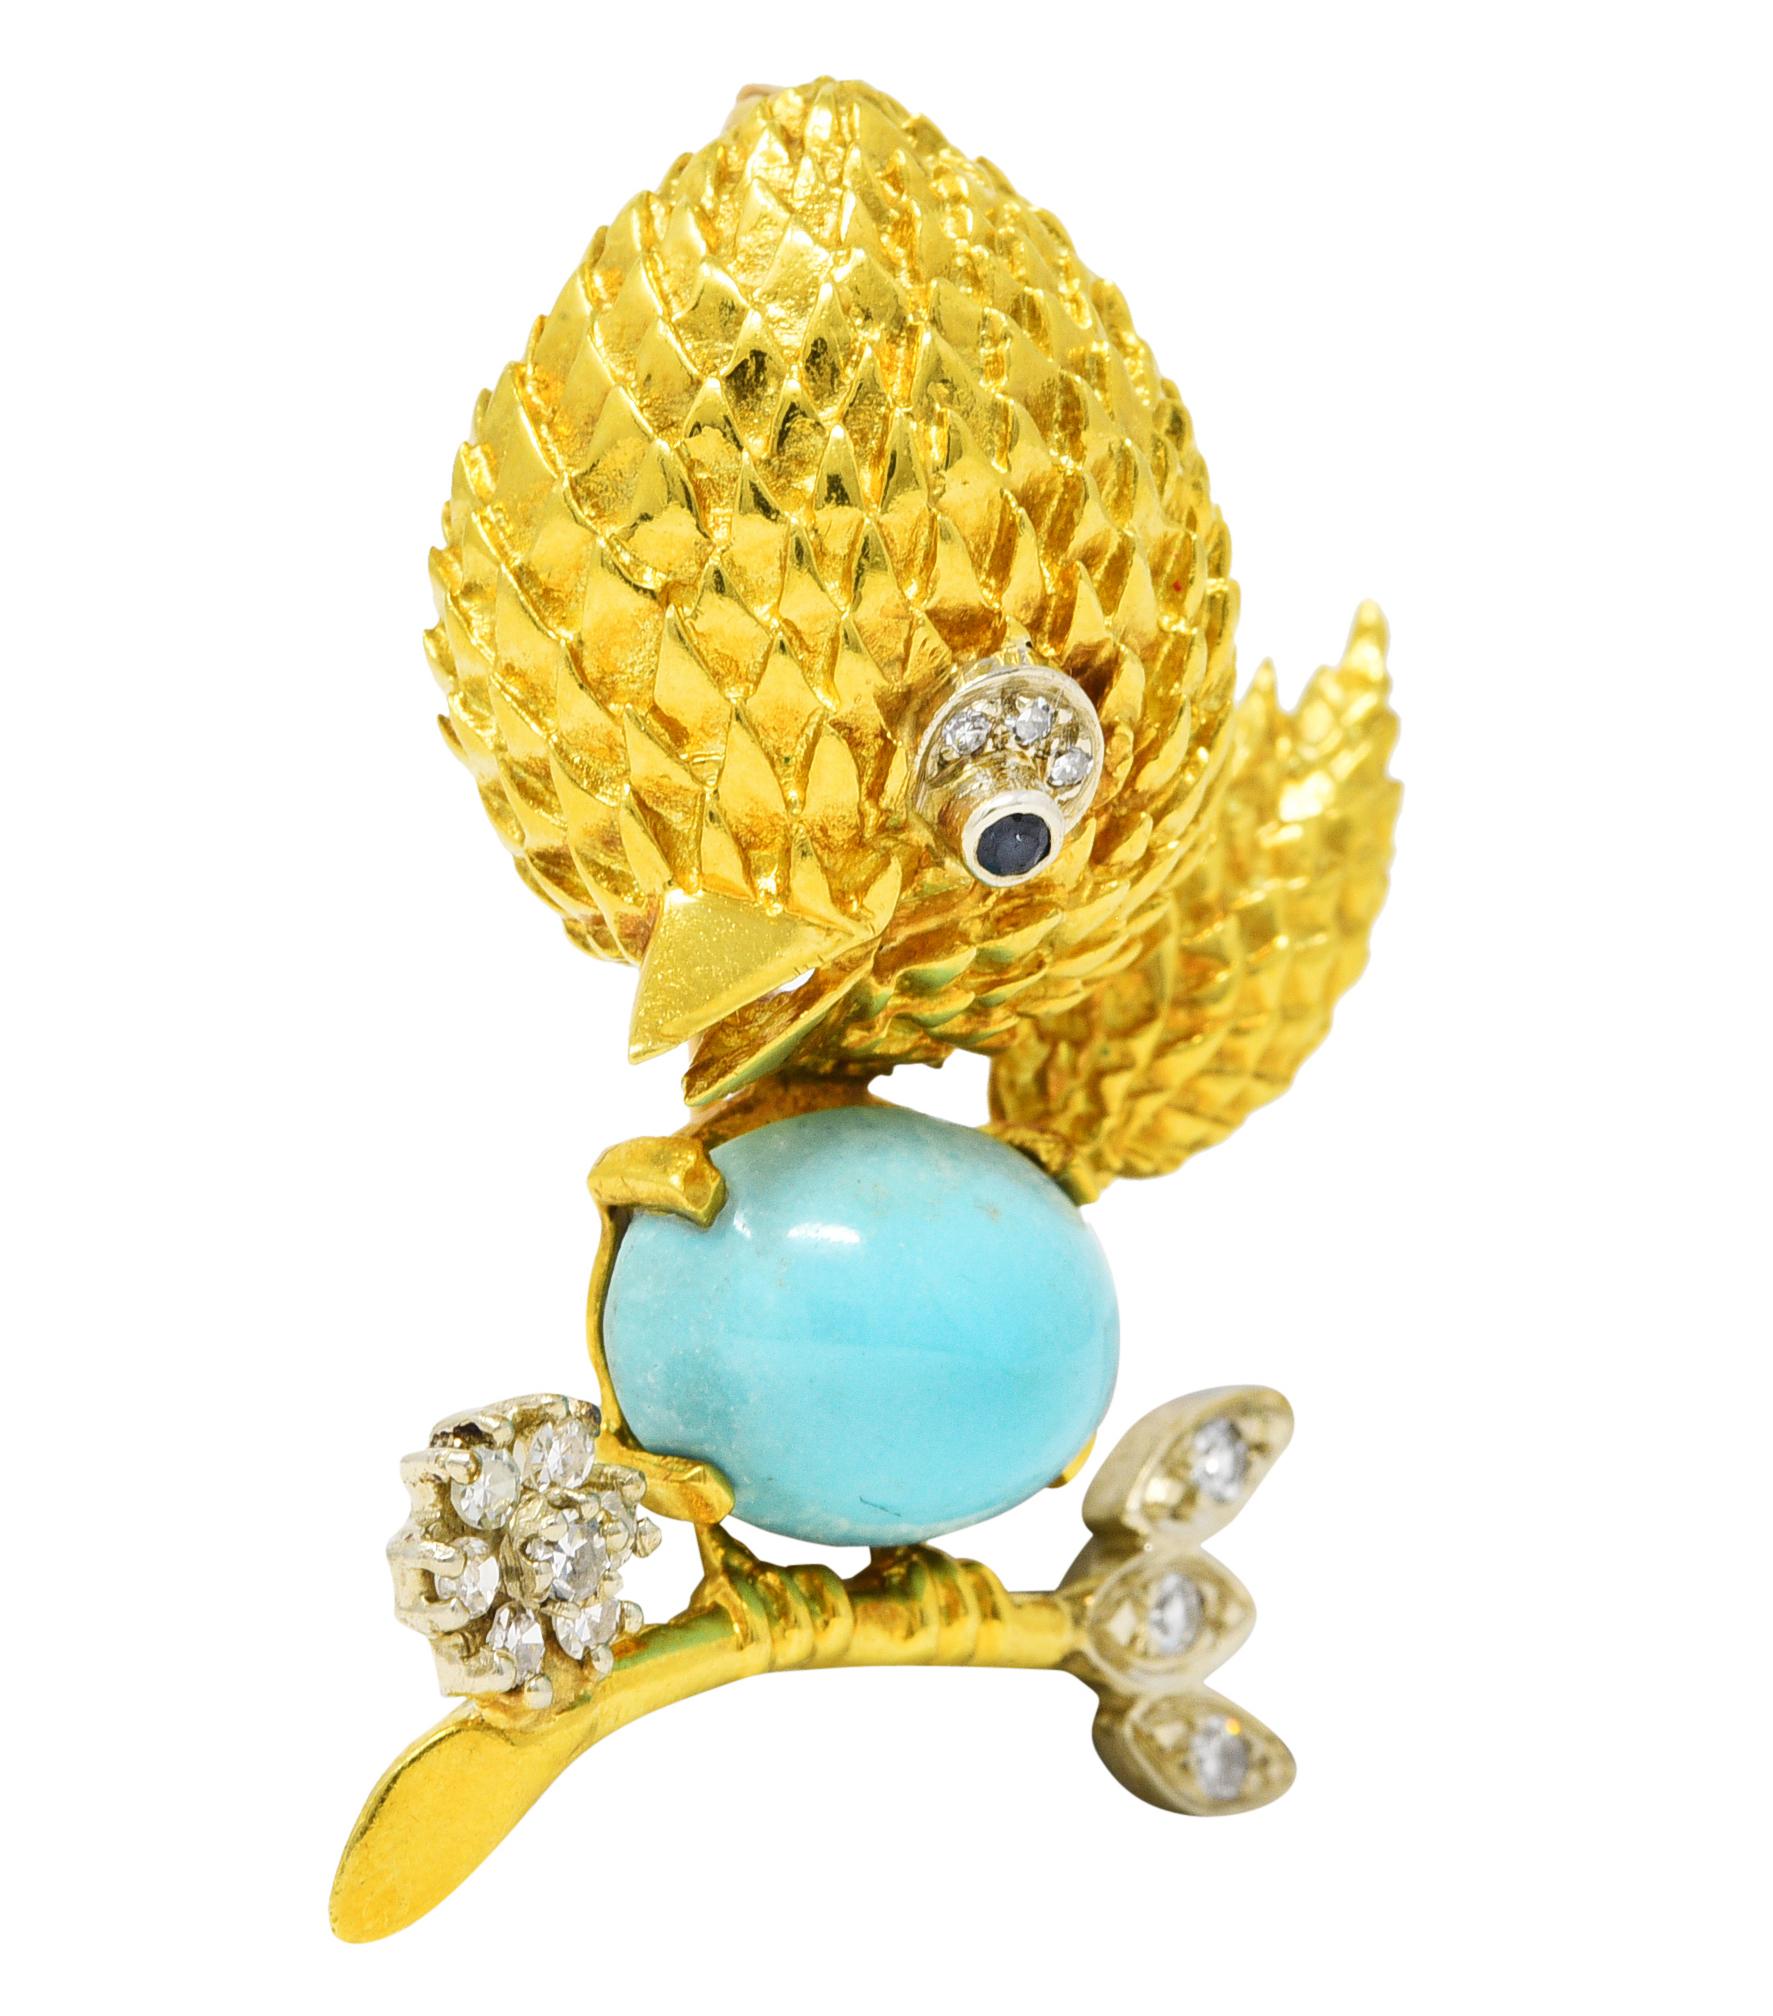 Brooch is designed as a stylized cartoon bird perched on a branch with a texturous head and tail. Featuring a bullet shaped turquoise cabochon body measuring 9.0 x 13.0 mm. Opaque light blue in color with subtle tan matrix - prong set east to west.